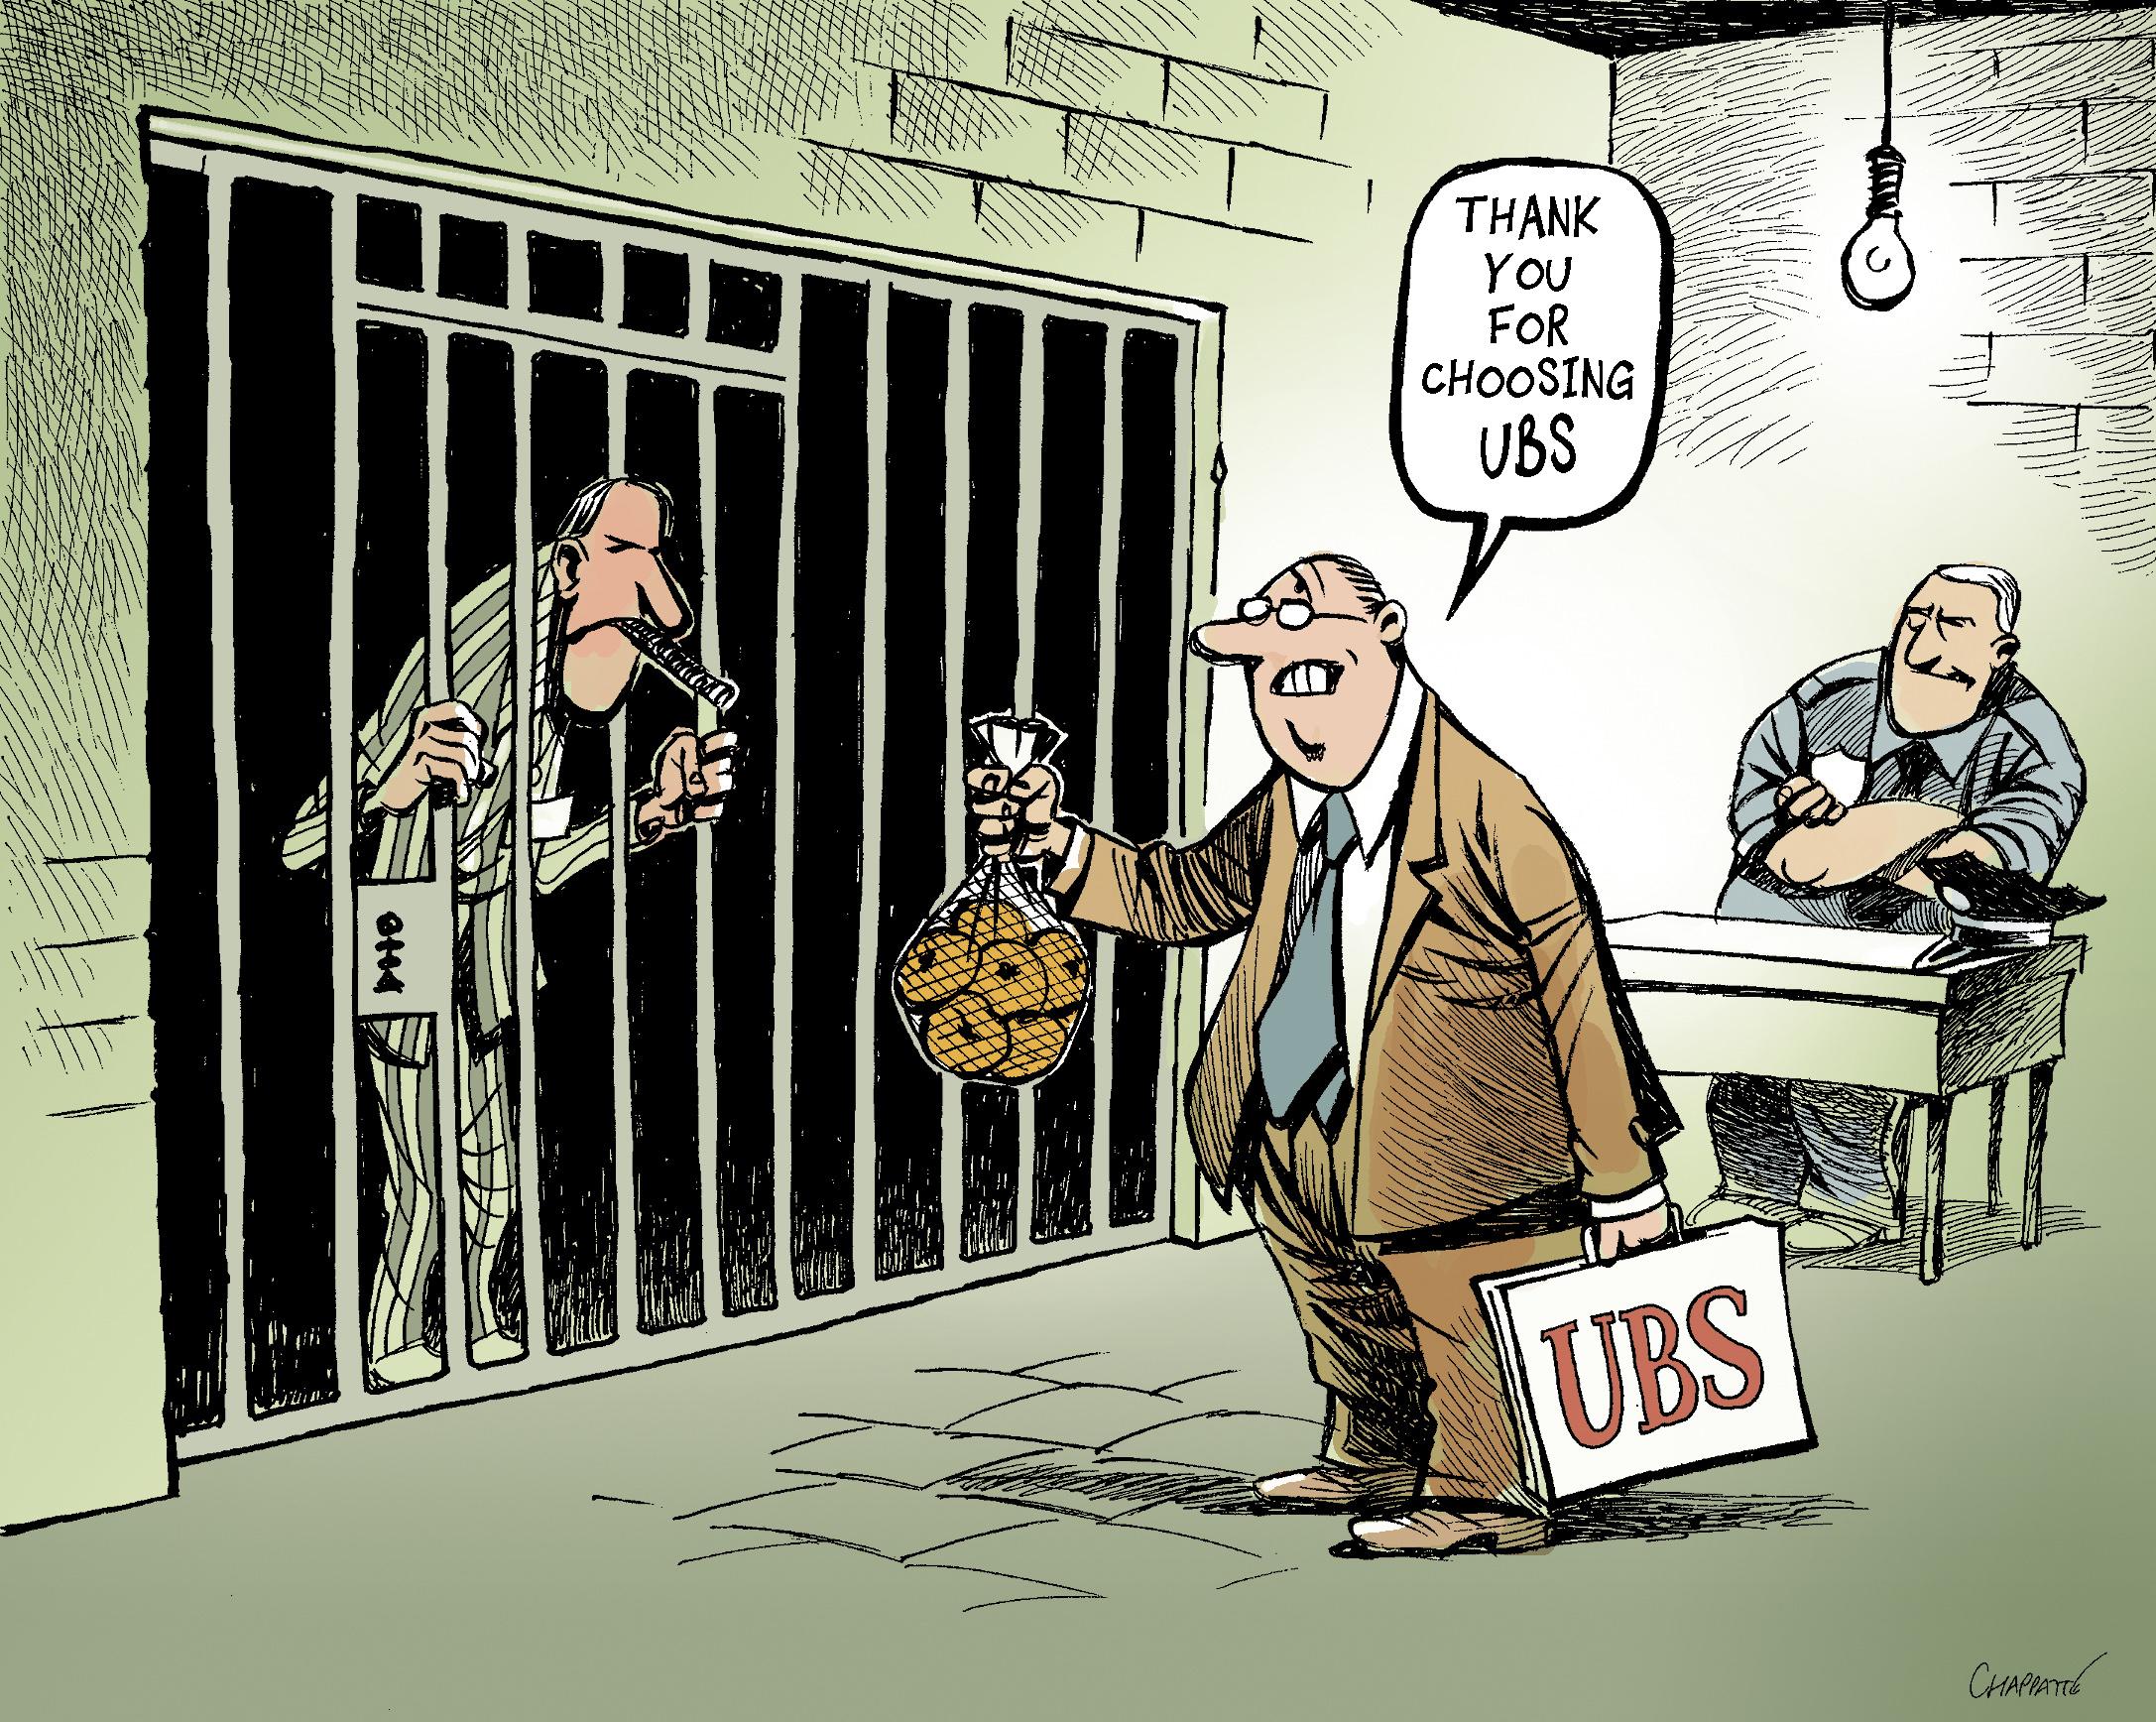 UBS To Give Up U.S. Clients